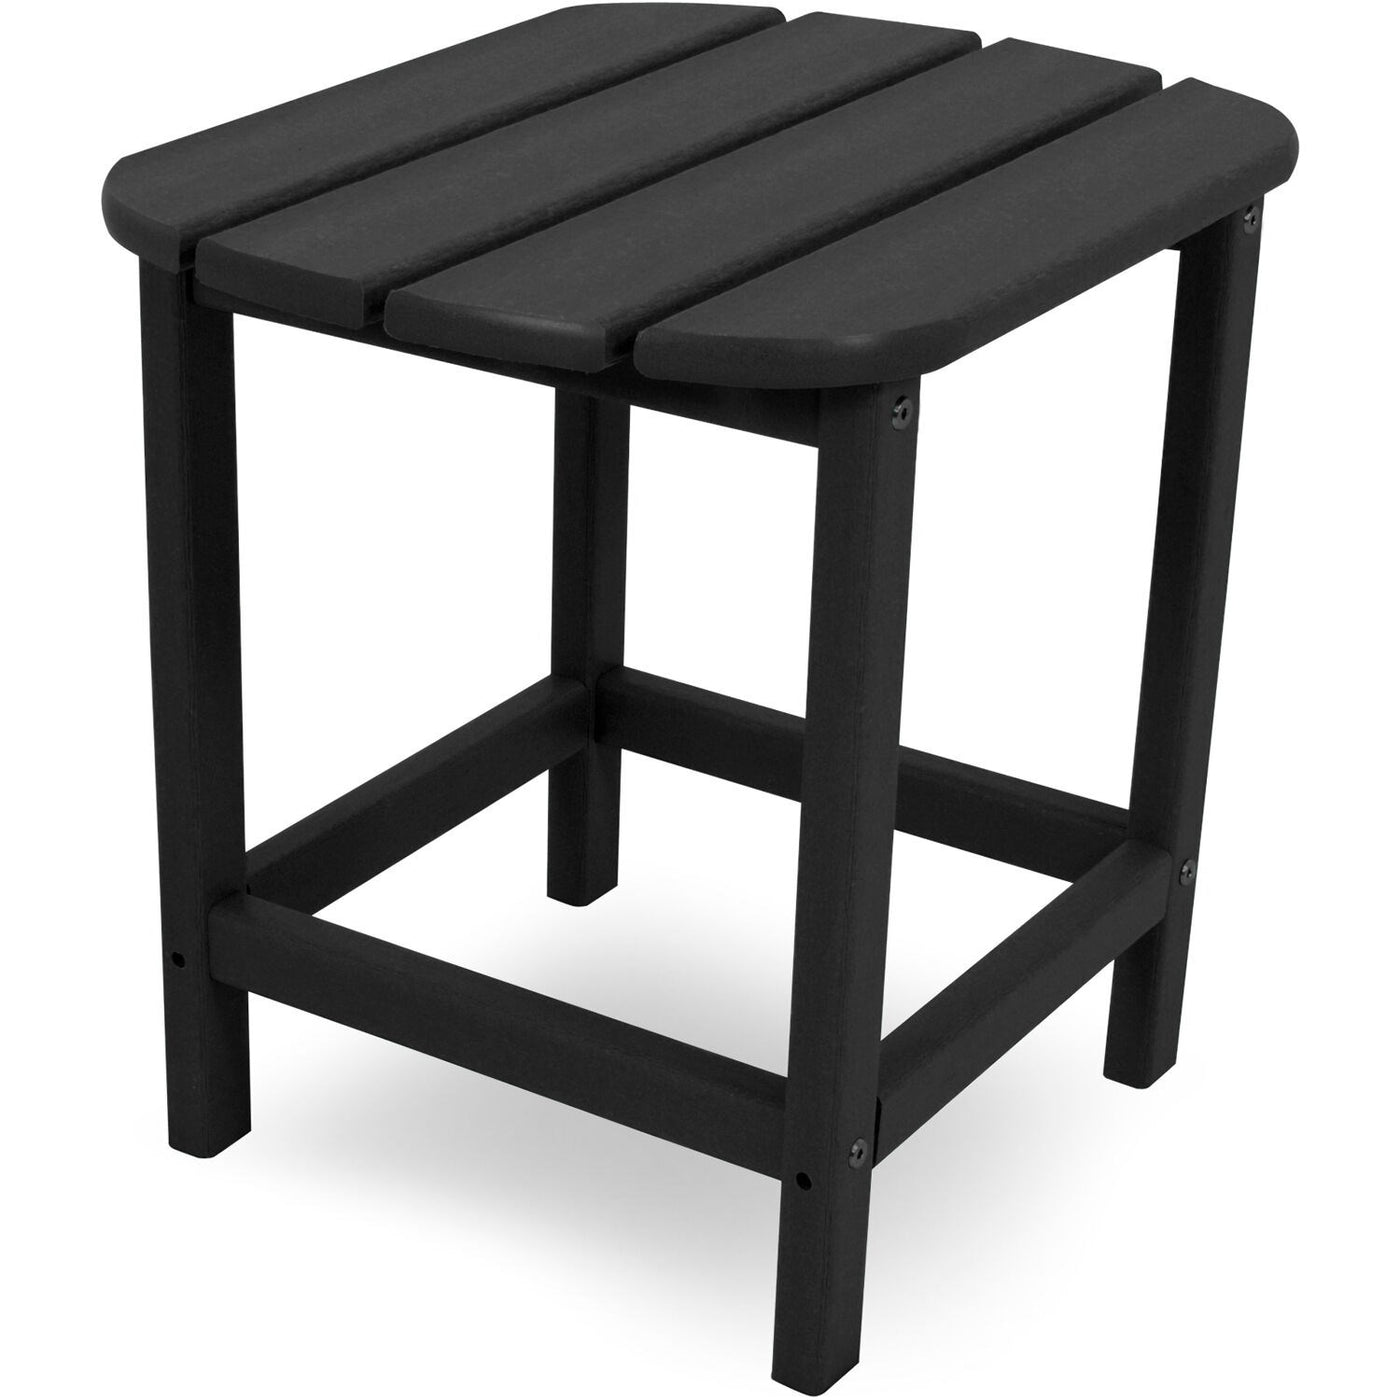 Hanover All-Weather 19"x15" Side Table - Black - GreenLivingSupply-Store